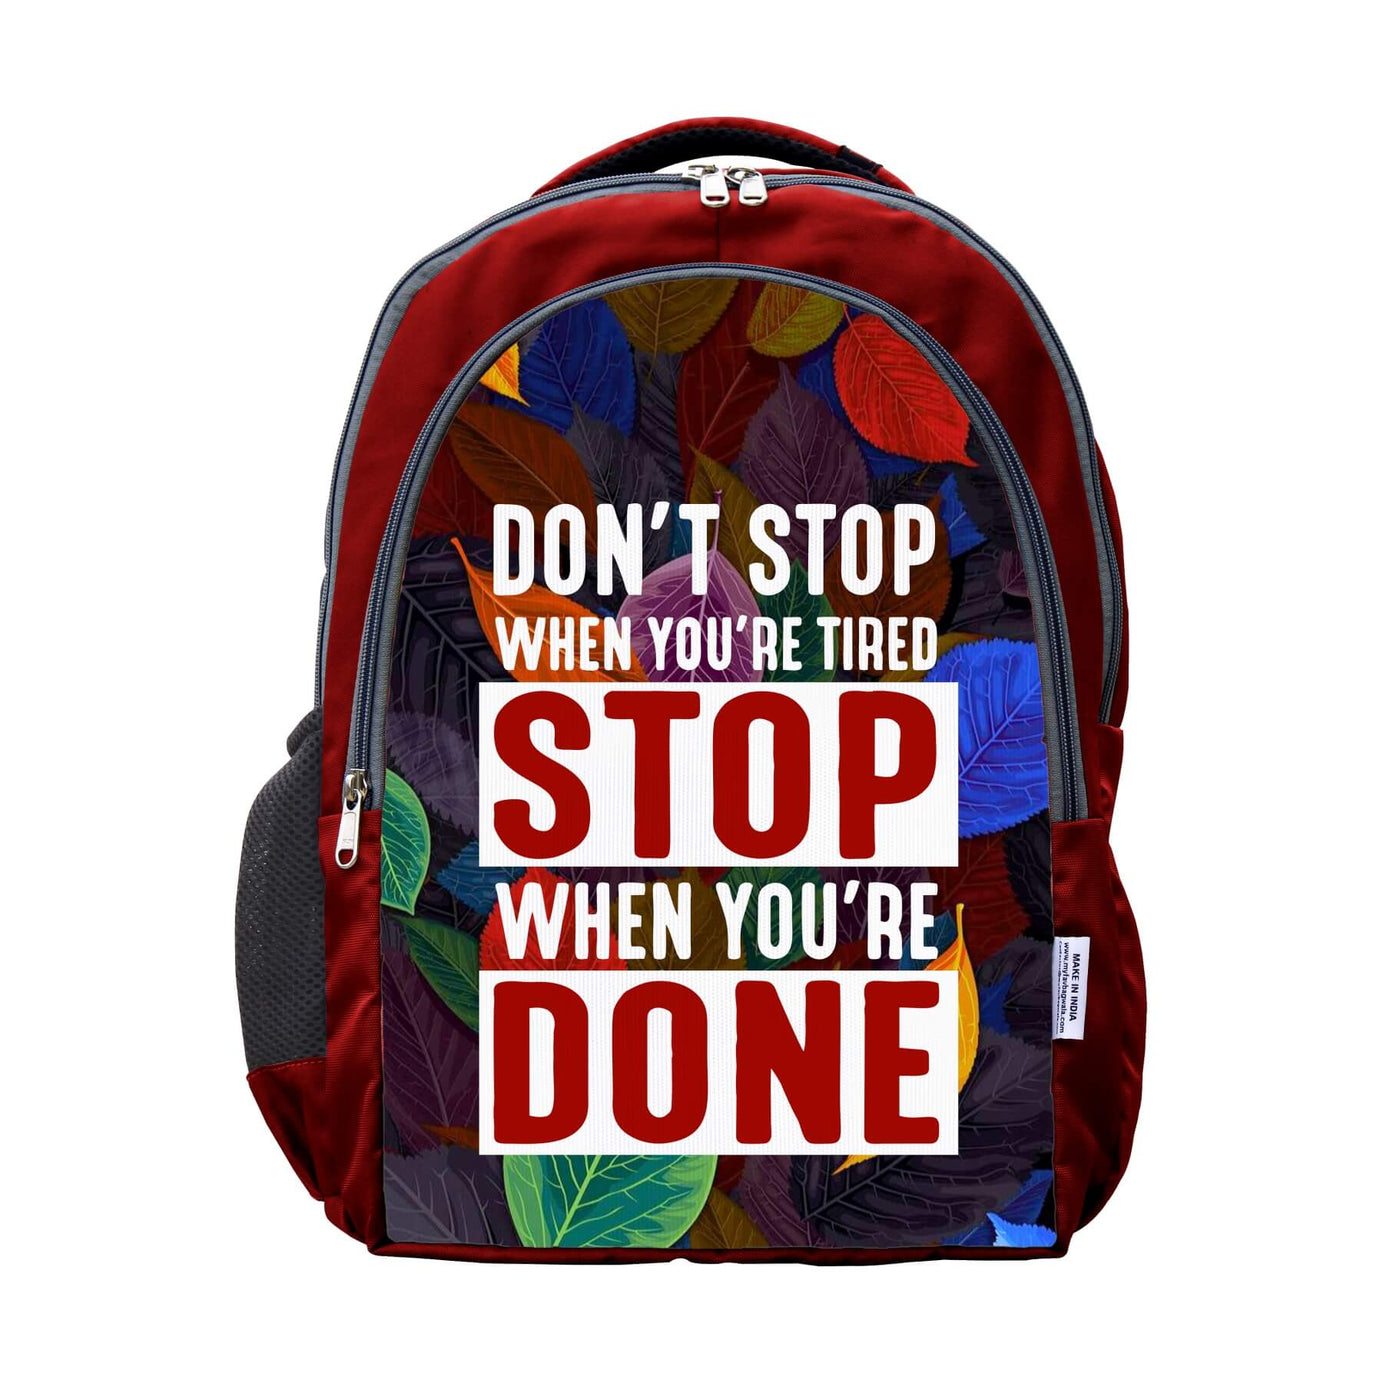 My Fav Motivational Quotes Laptop Backpack College / School Bag for Boys & Girls